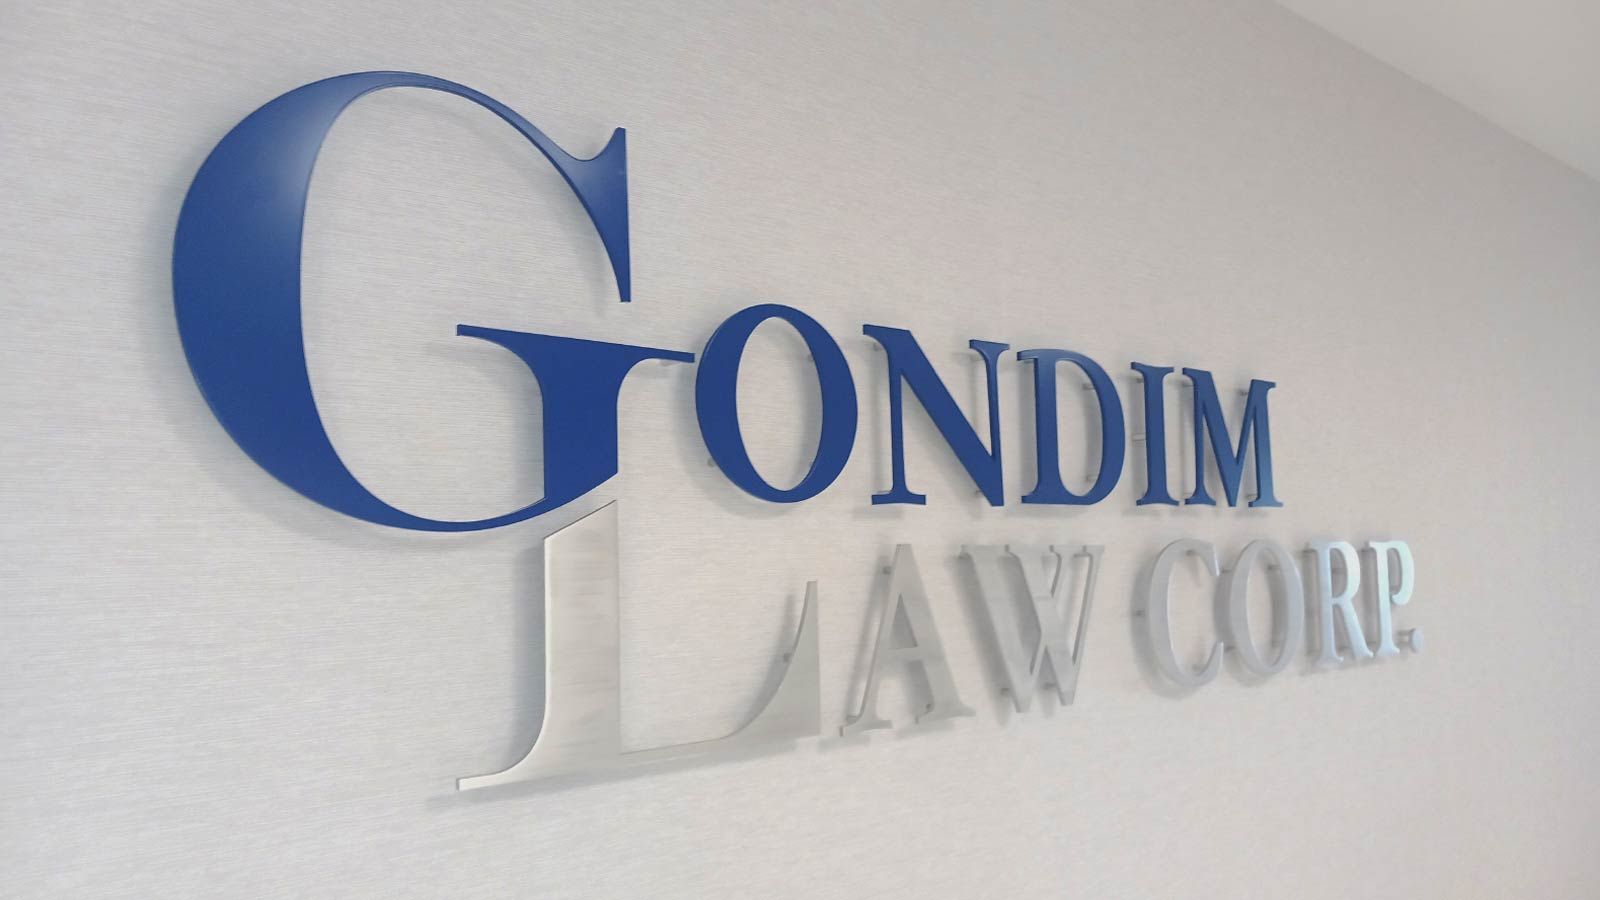 Gondim Law Corp aluminum sign attached to the wall